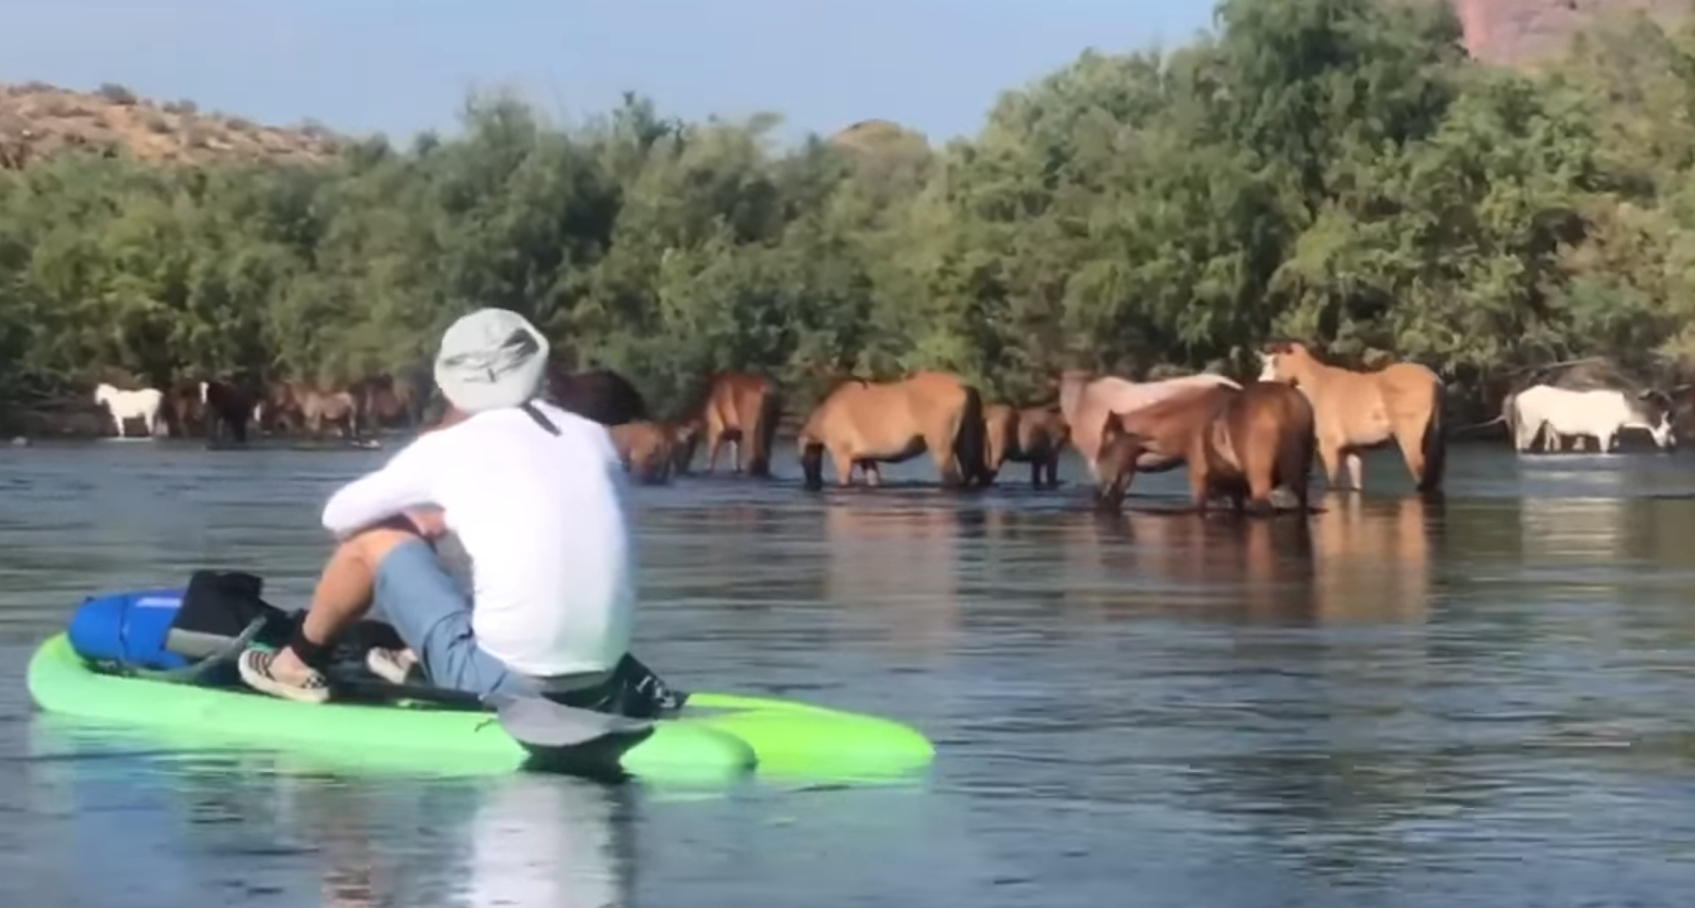 Paddling with the ponies!